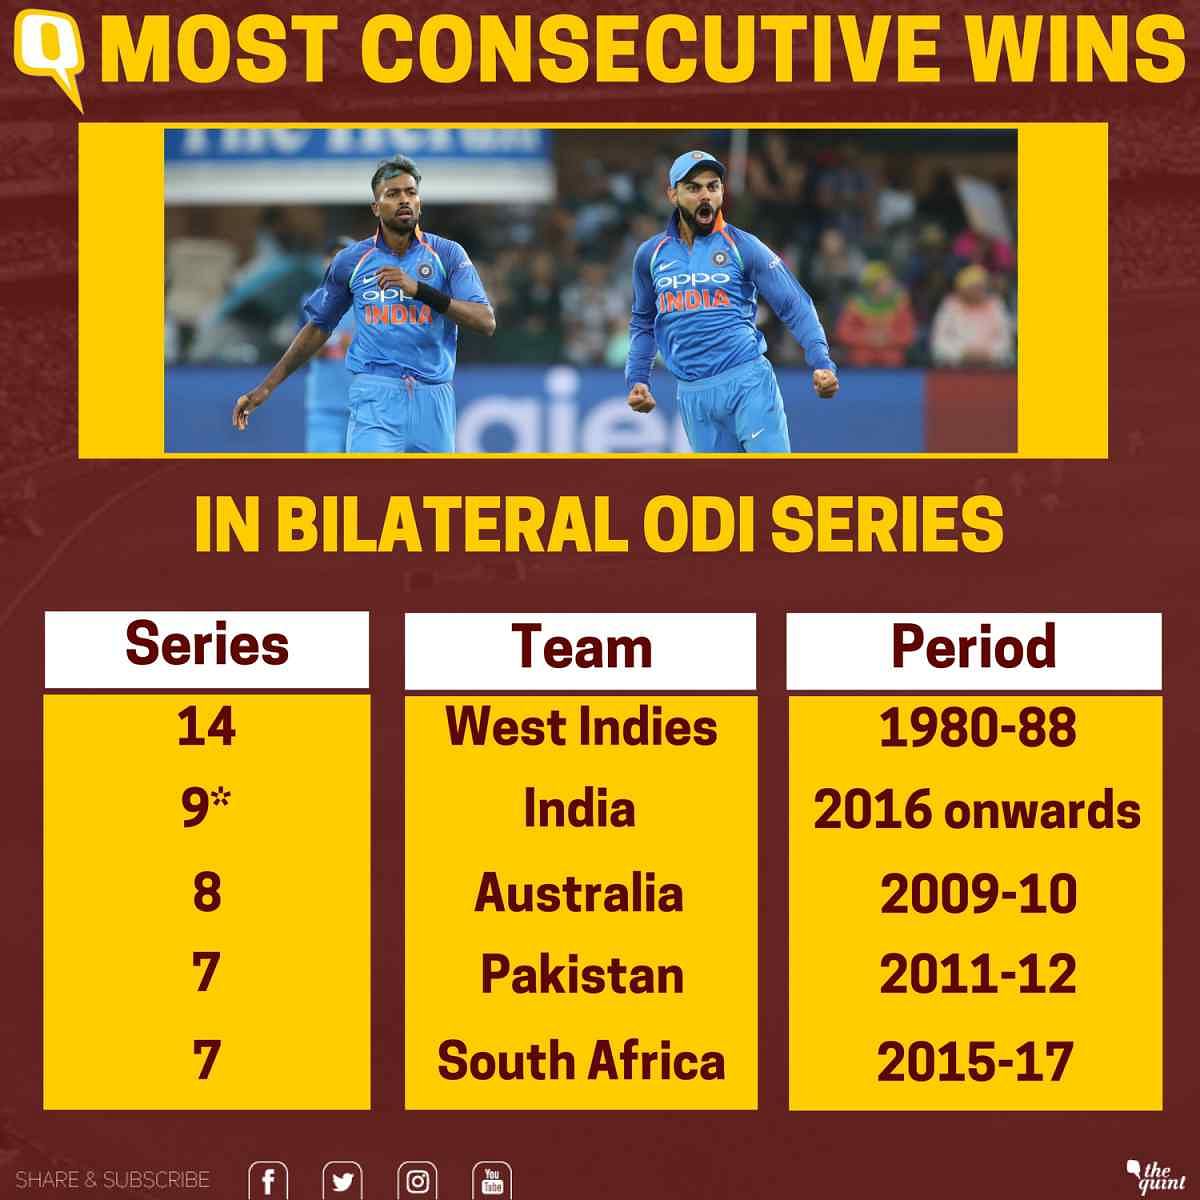 India’s maiden ODI win  at Port Elizabeth also resulted in their first bilateral ODI series win in South Africa.